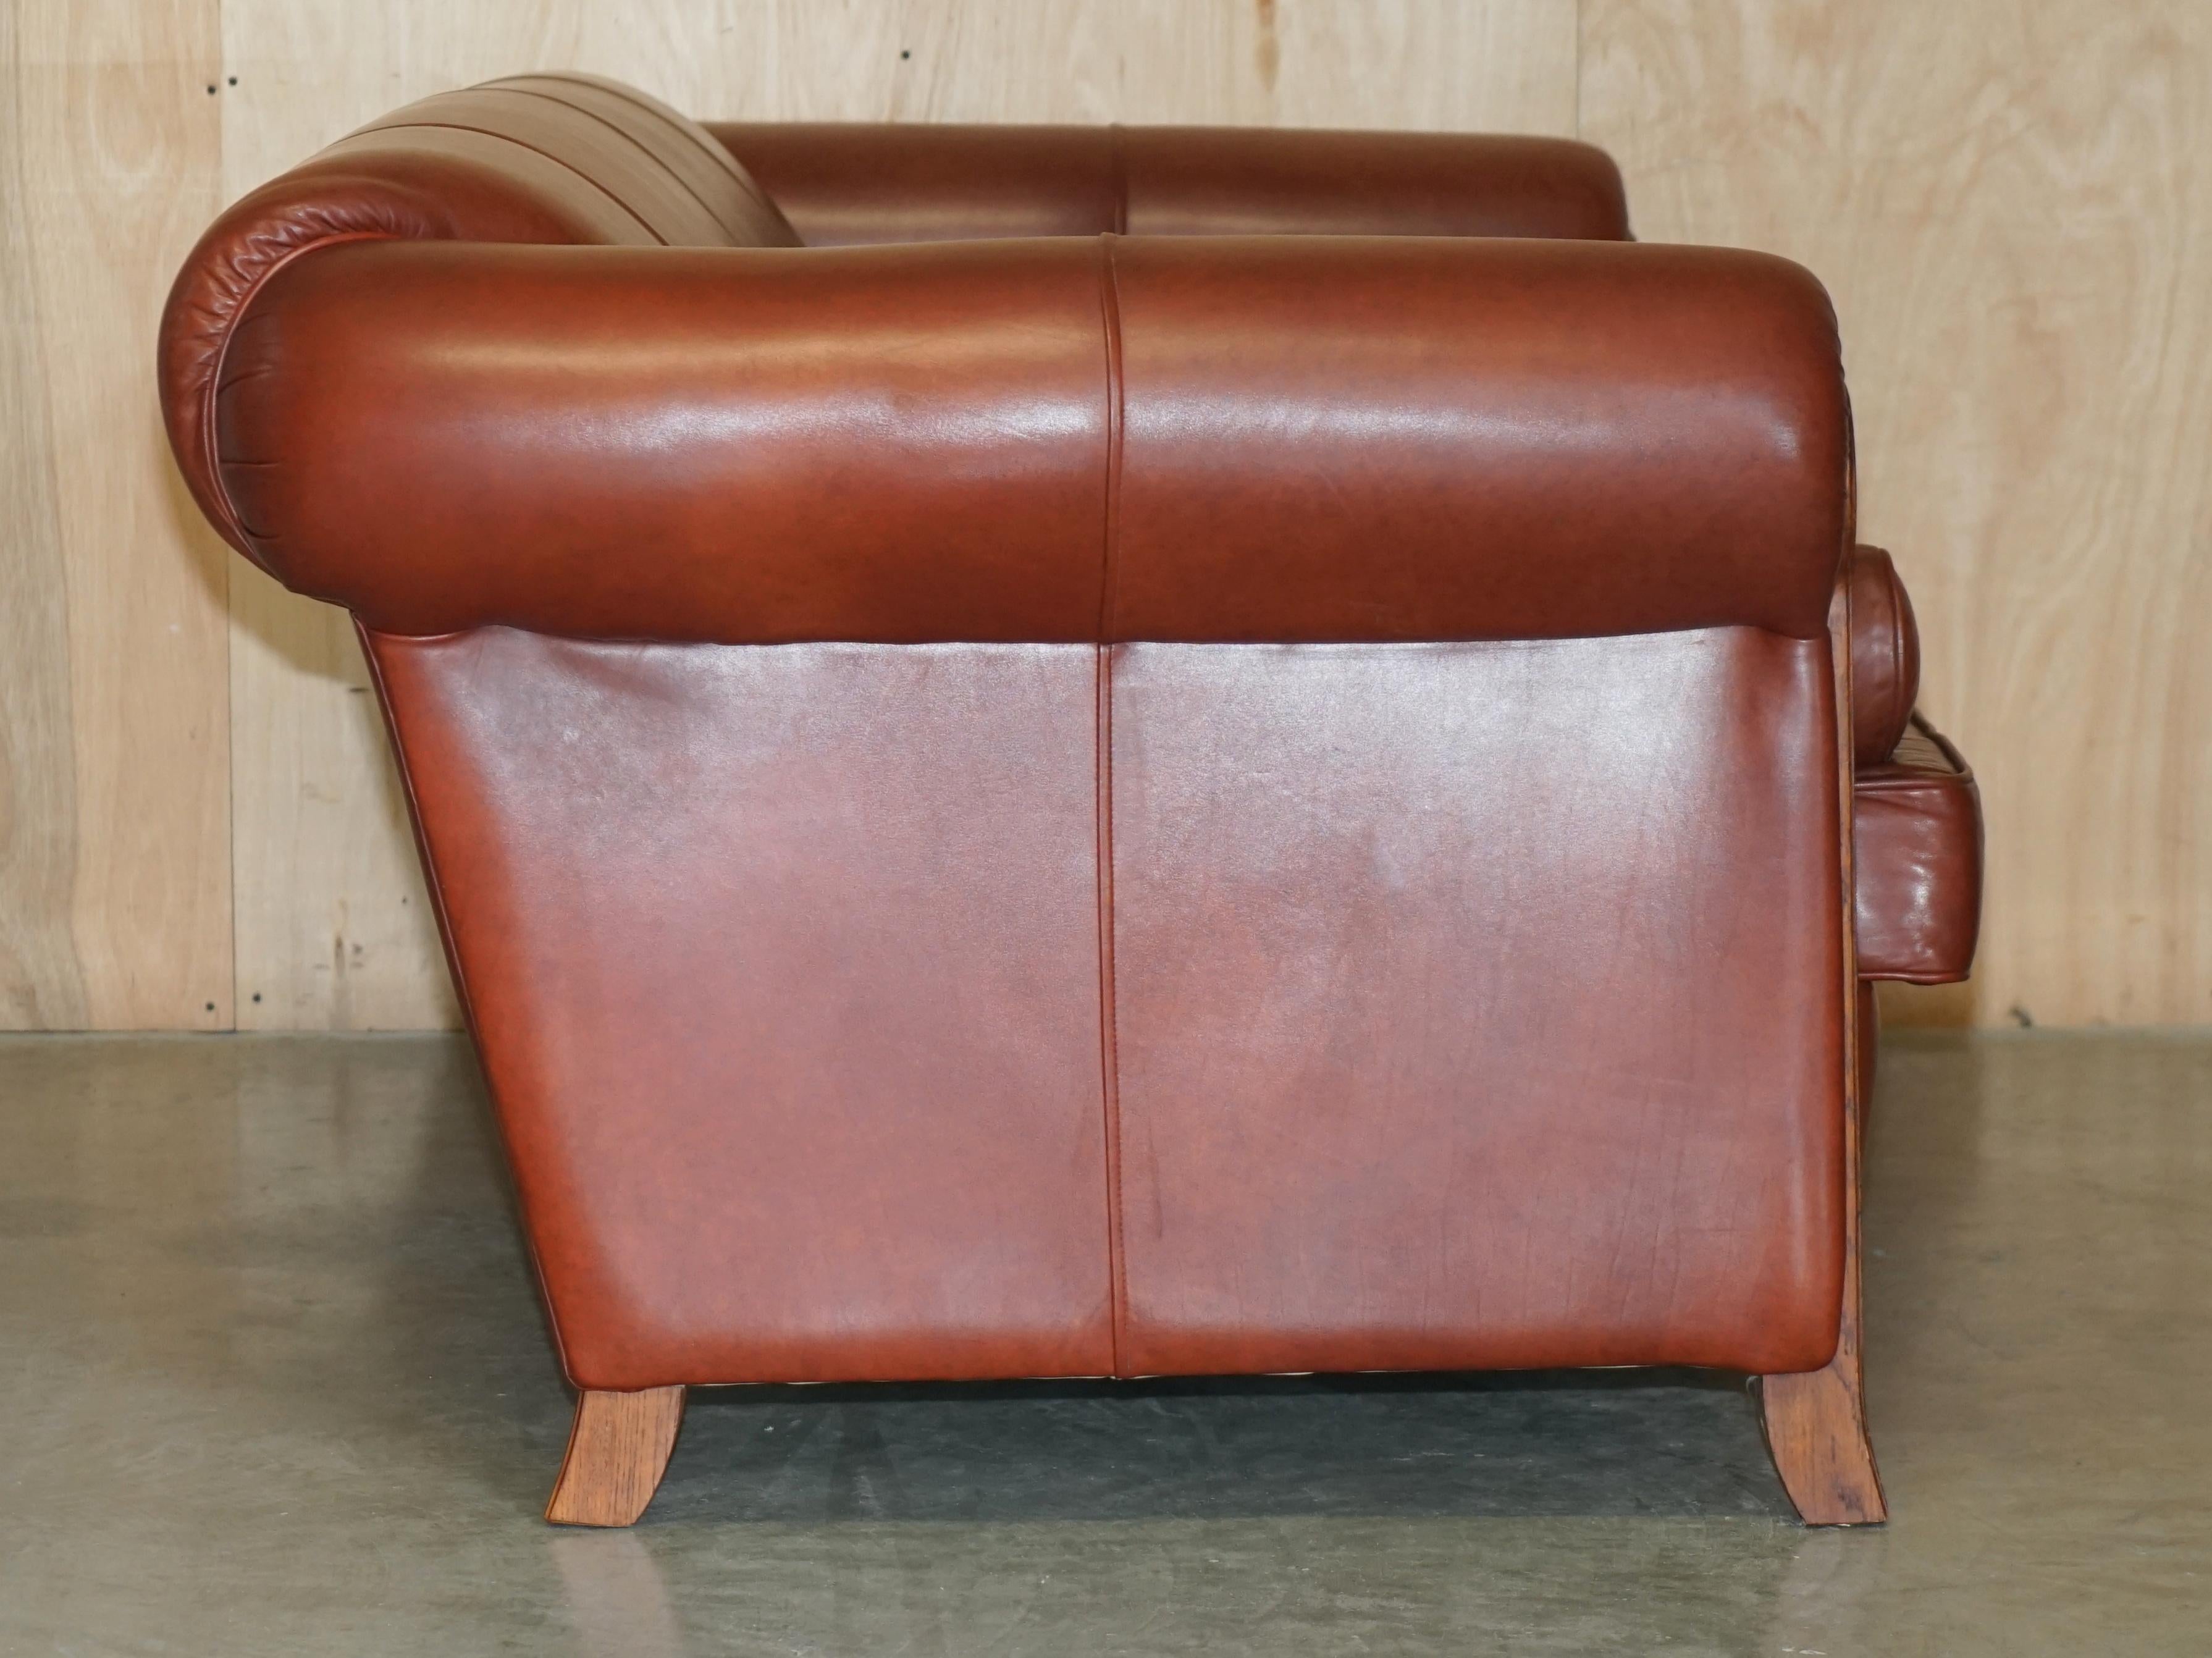 ViNTAGE CHESTNUT BROWN LEATHER LIBERTY'S ART NOUVEAU CLUB SOFA CARVED WOOD FRAMe For Sale 10